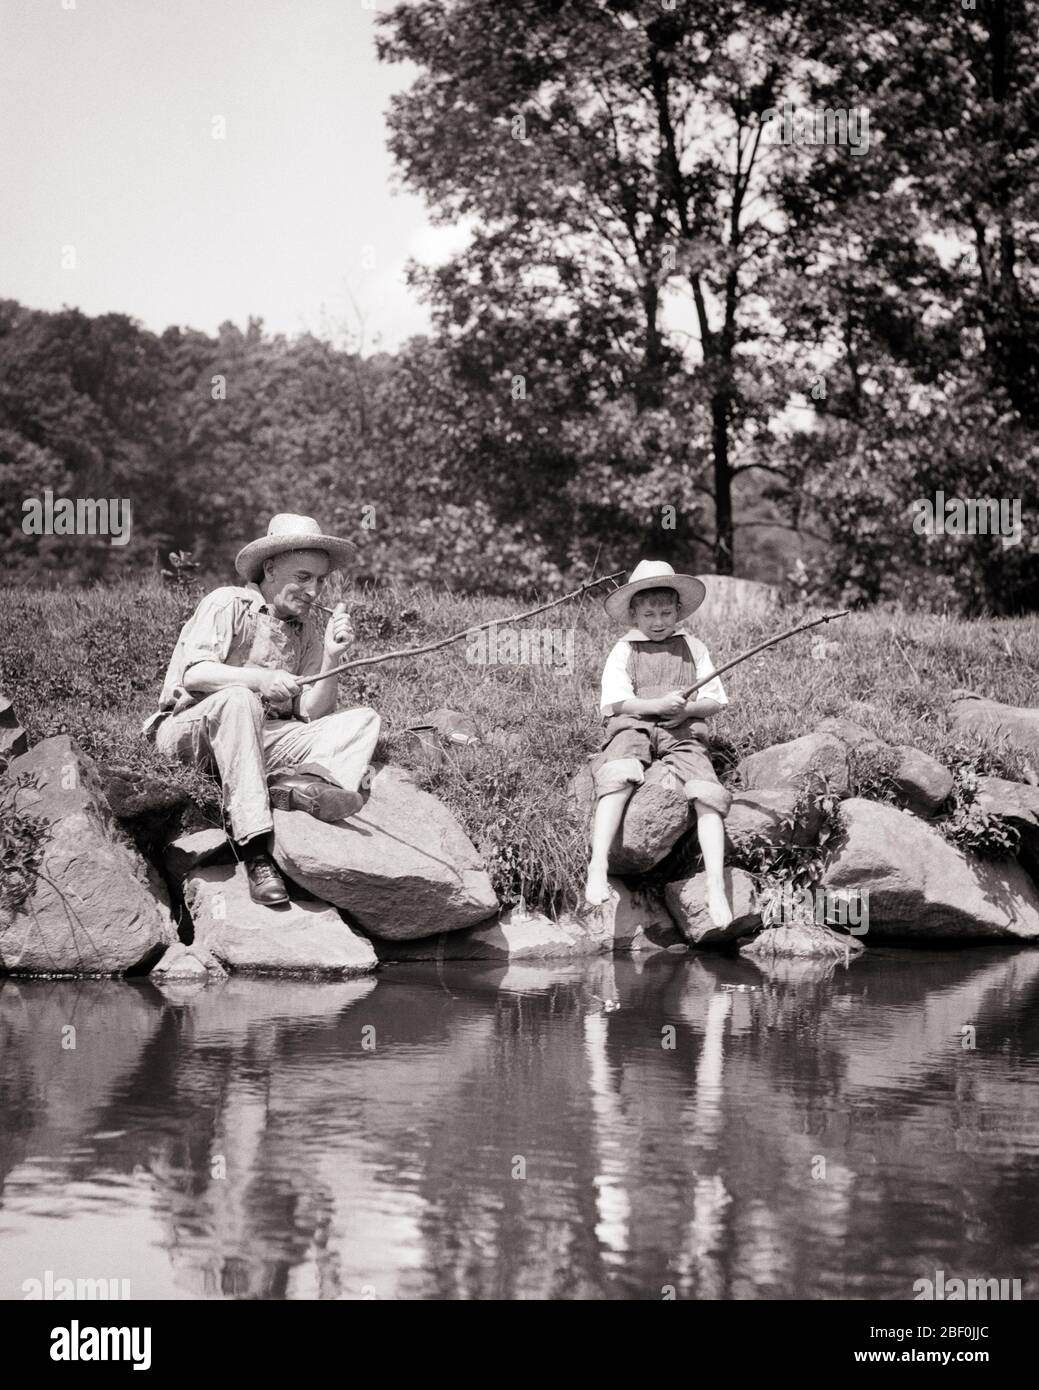 1930s BOY FISHING IN POND WITH HIS GRANDFATHER USING FISHING RODS MAKE FROM TWIGS - a4789 HAR001 HARS FRIENDSHIP HALF-LENGTH PERSONS MALES SENIOR MAN SENIOR ADULT B&W HAPPINESS OLDSTERS OLDSTER HIS PIPES TOBACCO RECREATION BAD HABIT SMOKER USING ELDERS NICOTINE CONNECTION GRANDFATHERS STRAW HAT ADDICTIVE GRANDSON TWIGS ANGLING COOPERATION CORNCOB GROWTH JUVENILES RELAXATION RODS TOGETHERNESS BLACK AND WHITE CAUCASIAN ETHNICITY GRANDPA HAR001 OLD FASHIONED Stock Photo